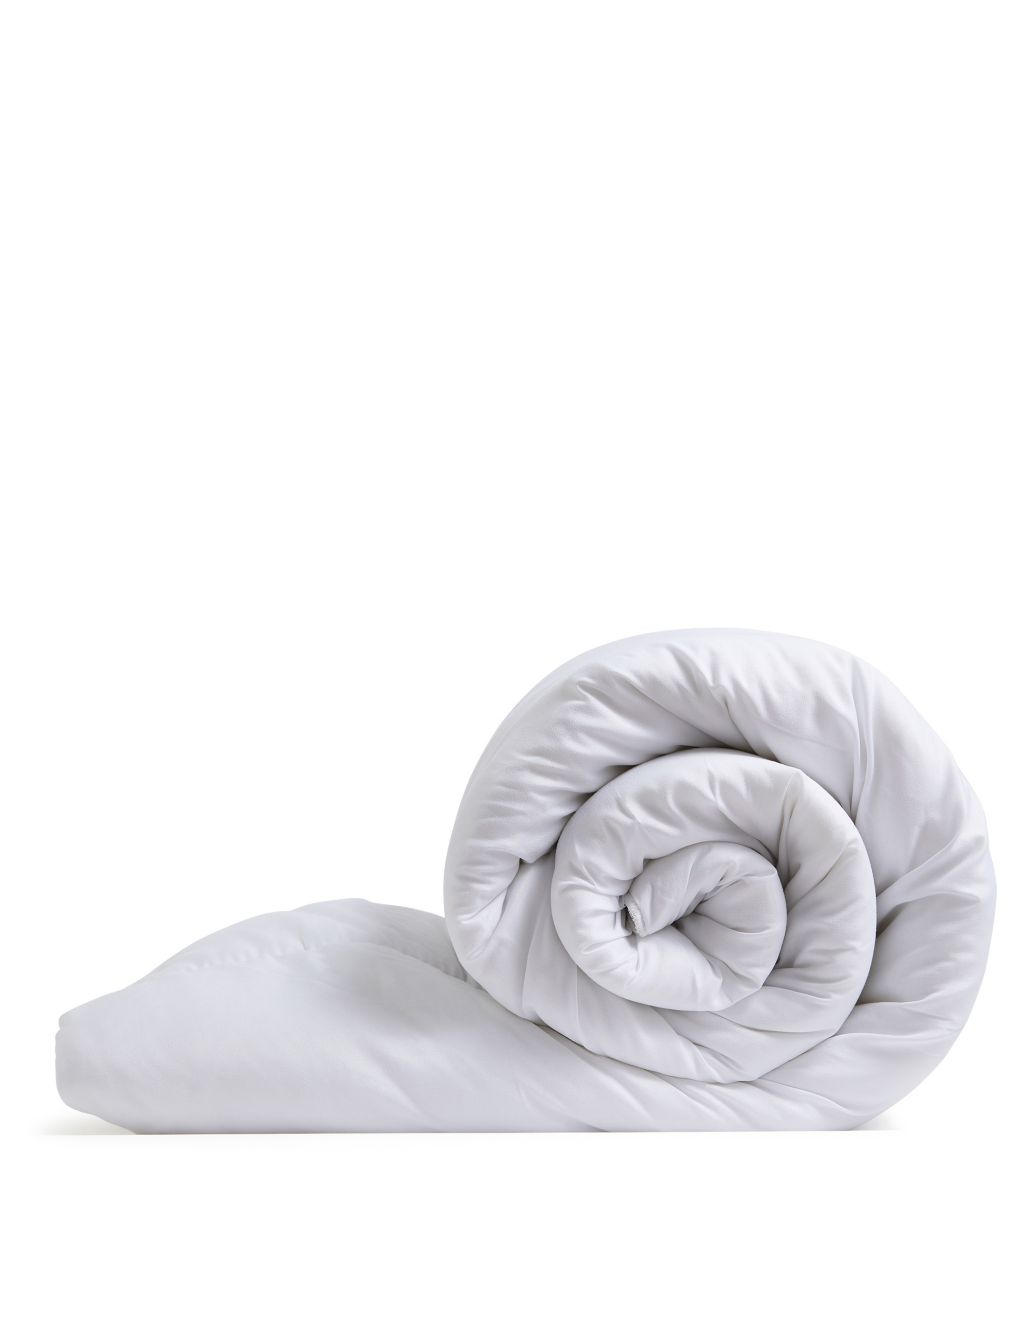 Simply Protect 13.5 Tog Duvet image 4